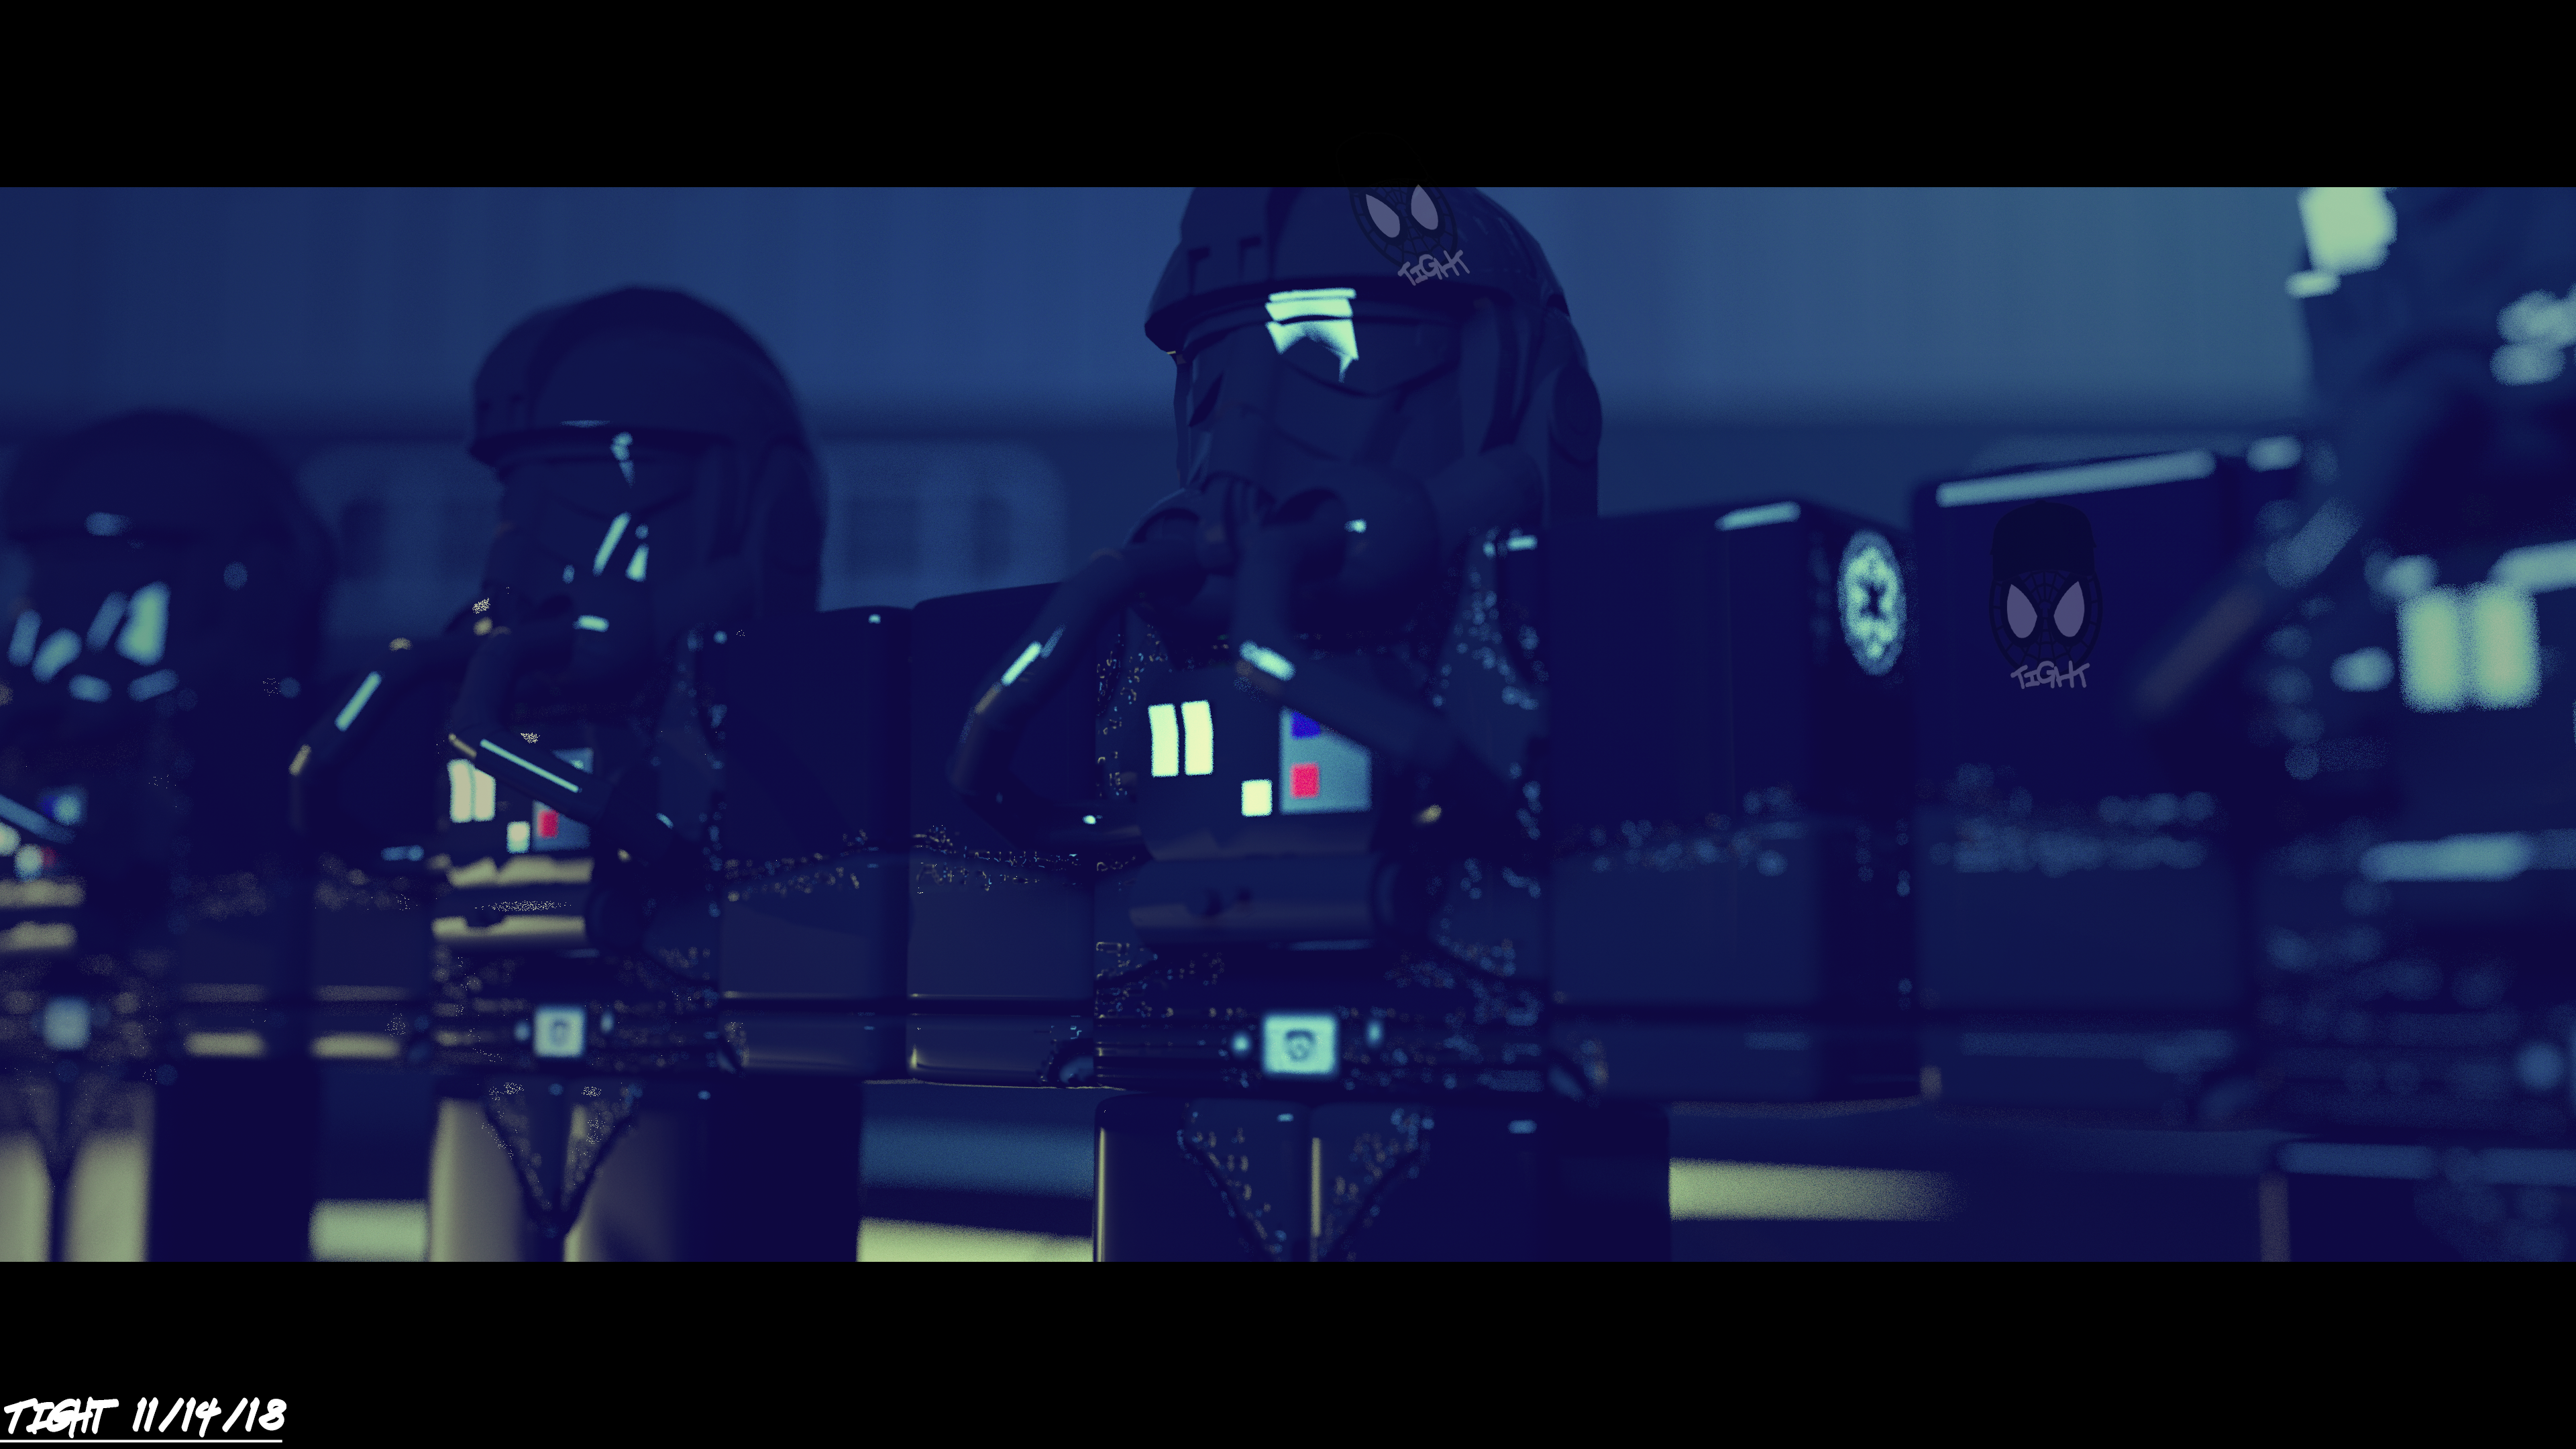 Imperial Troopers Roblox Gfx By Llcooltight On Deviantart - star wars sith roblox gfx